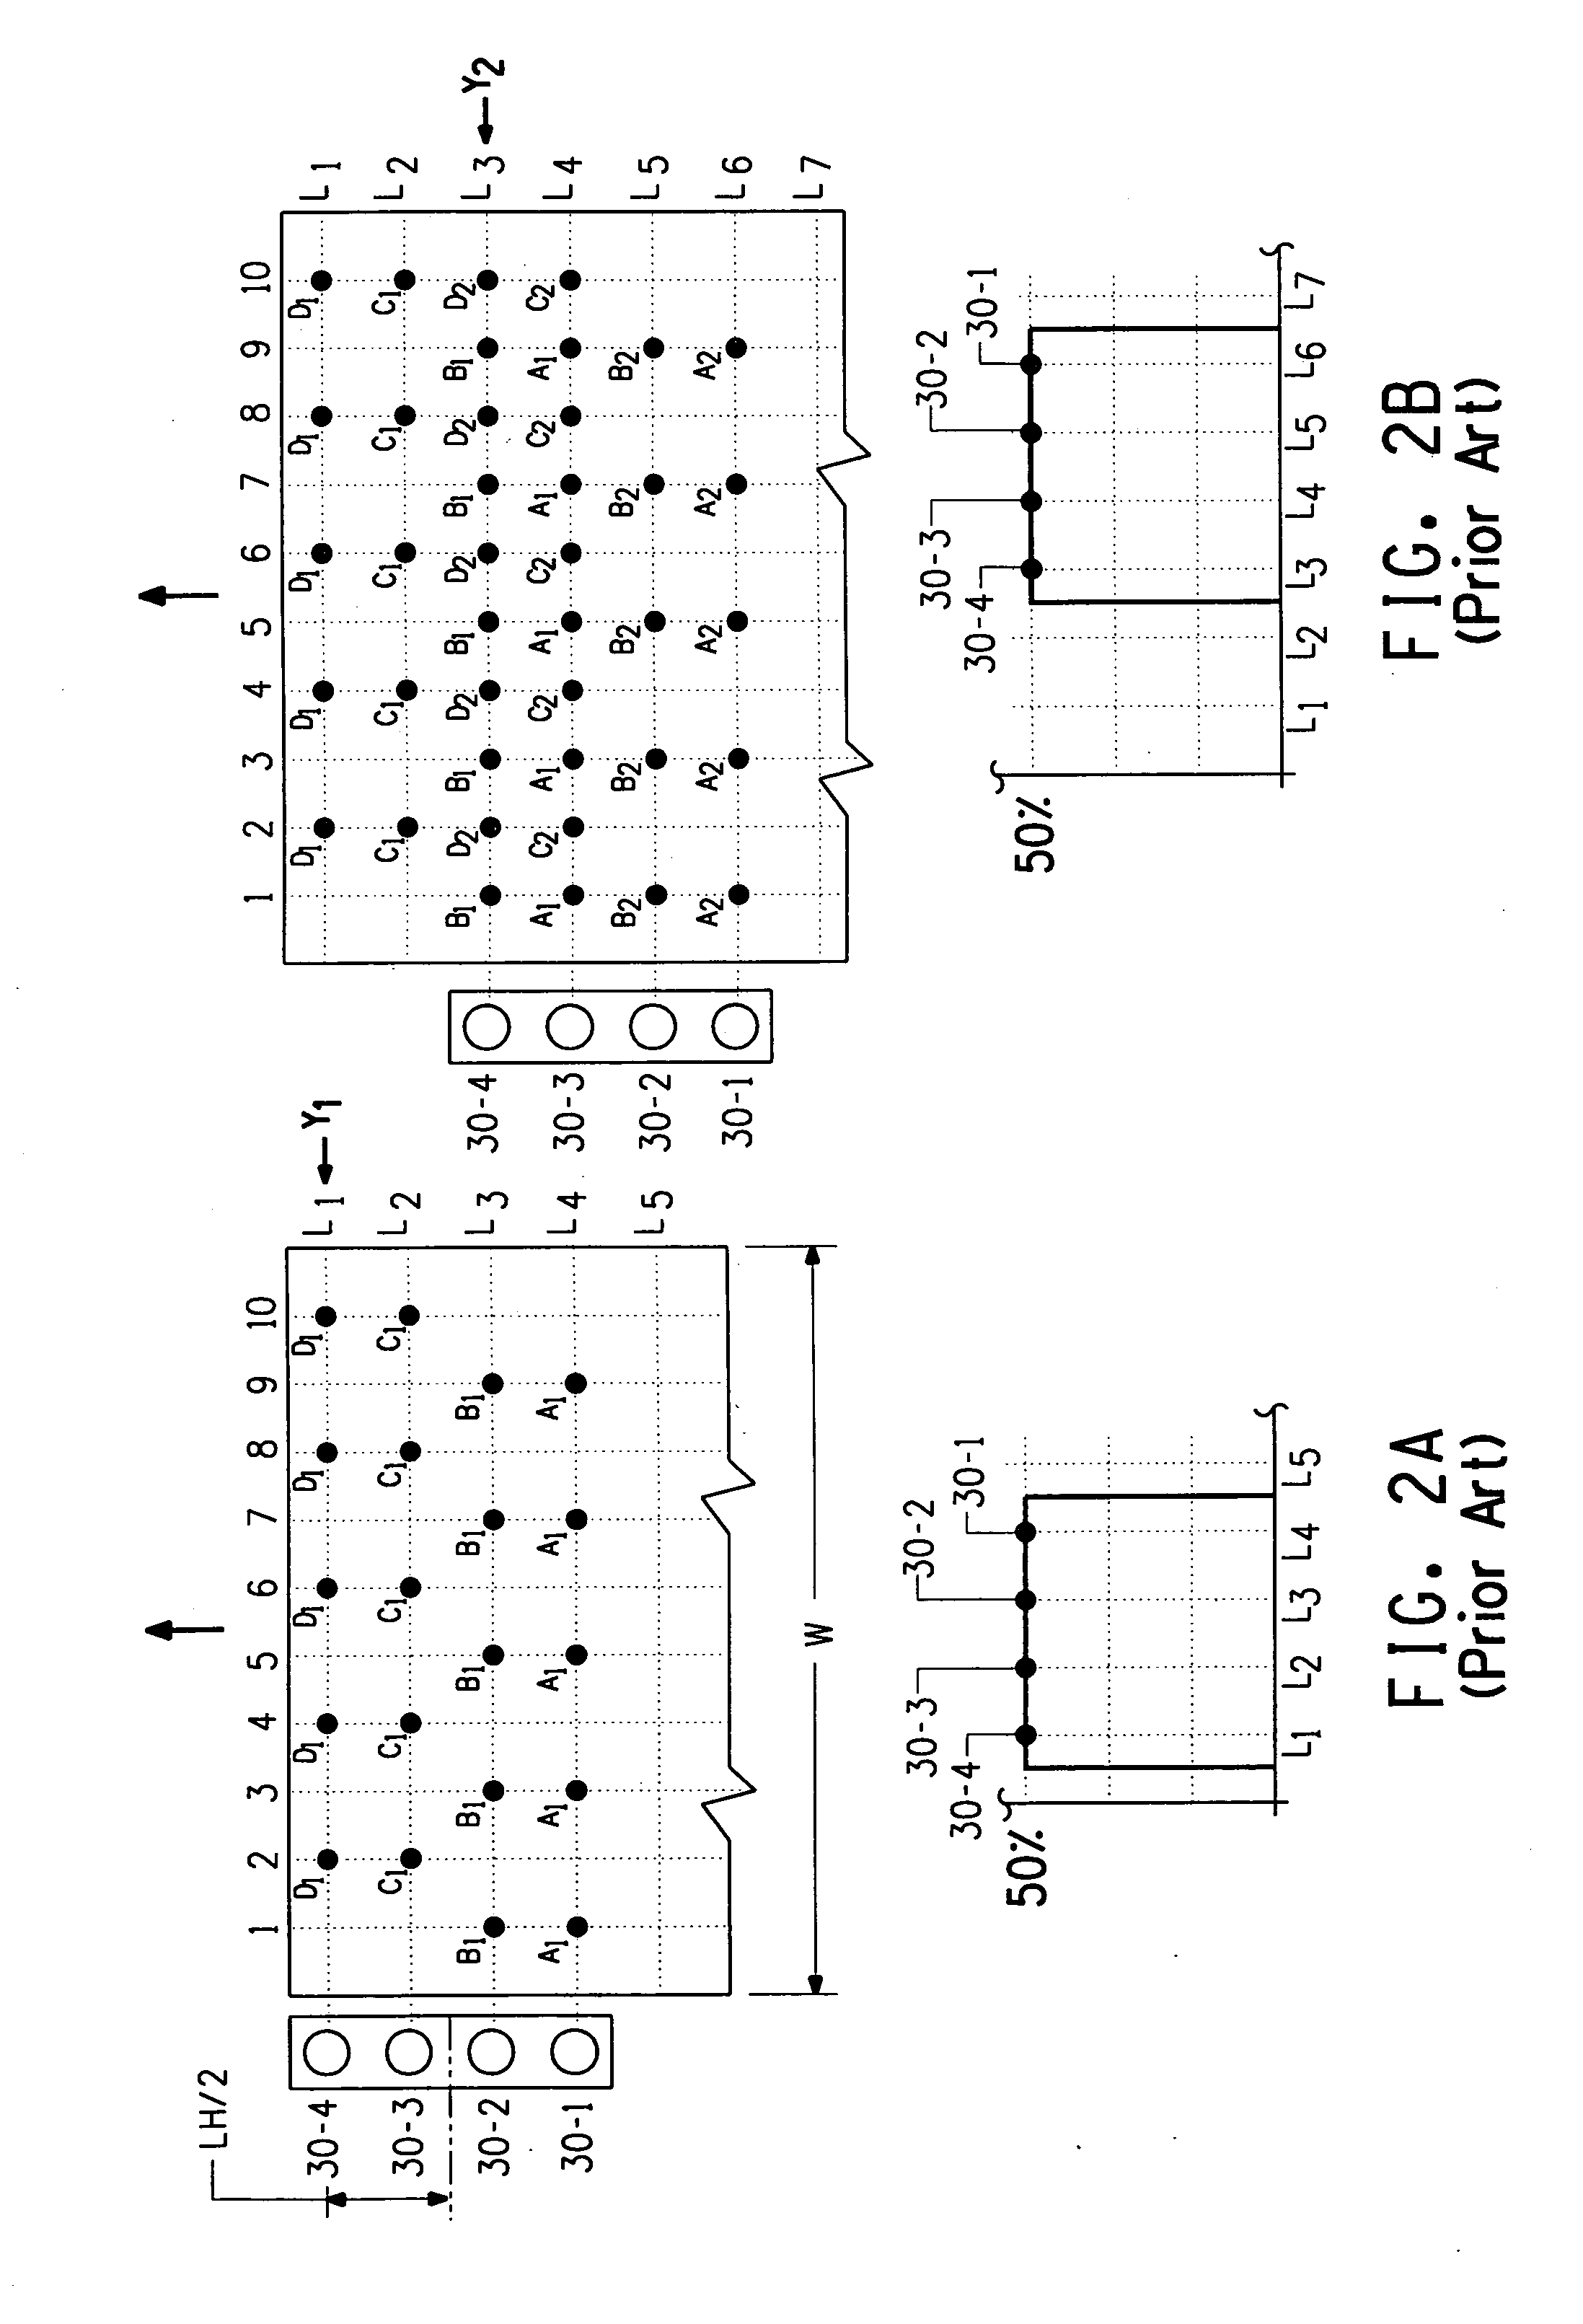 Computer readable medium with a program for minimizing banding artifacts in an ink jet printing apparatus